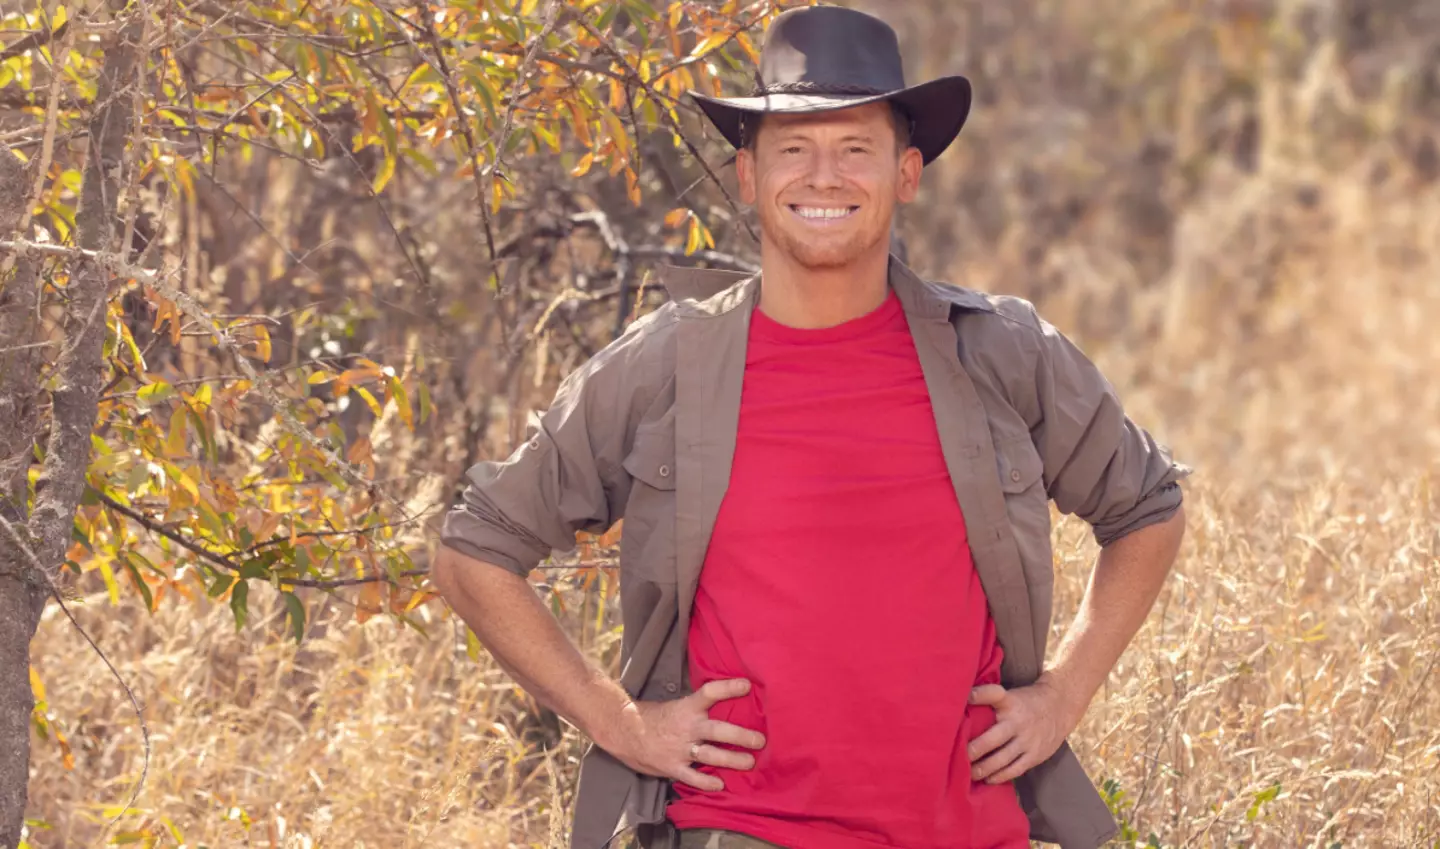 Joe Swash returned to I'm A Celebrity last night for its spin-off series.